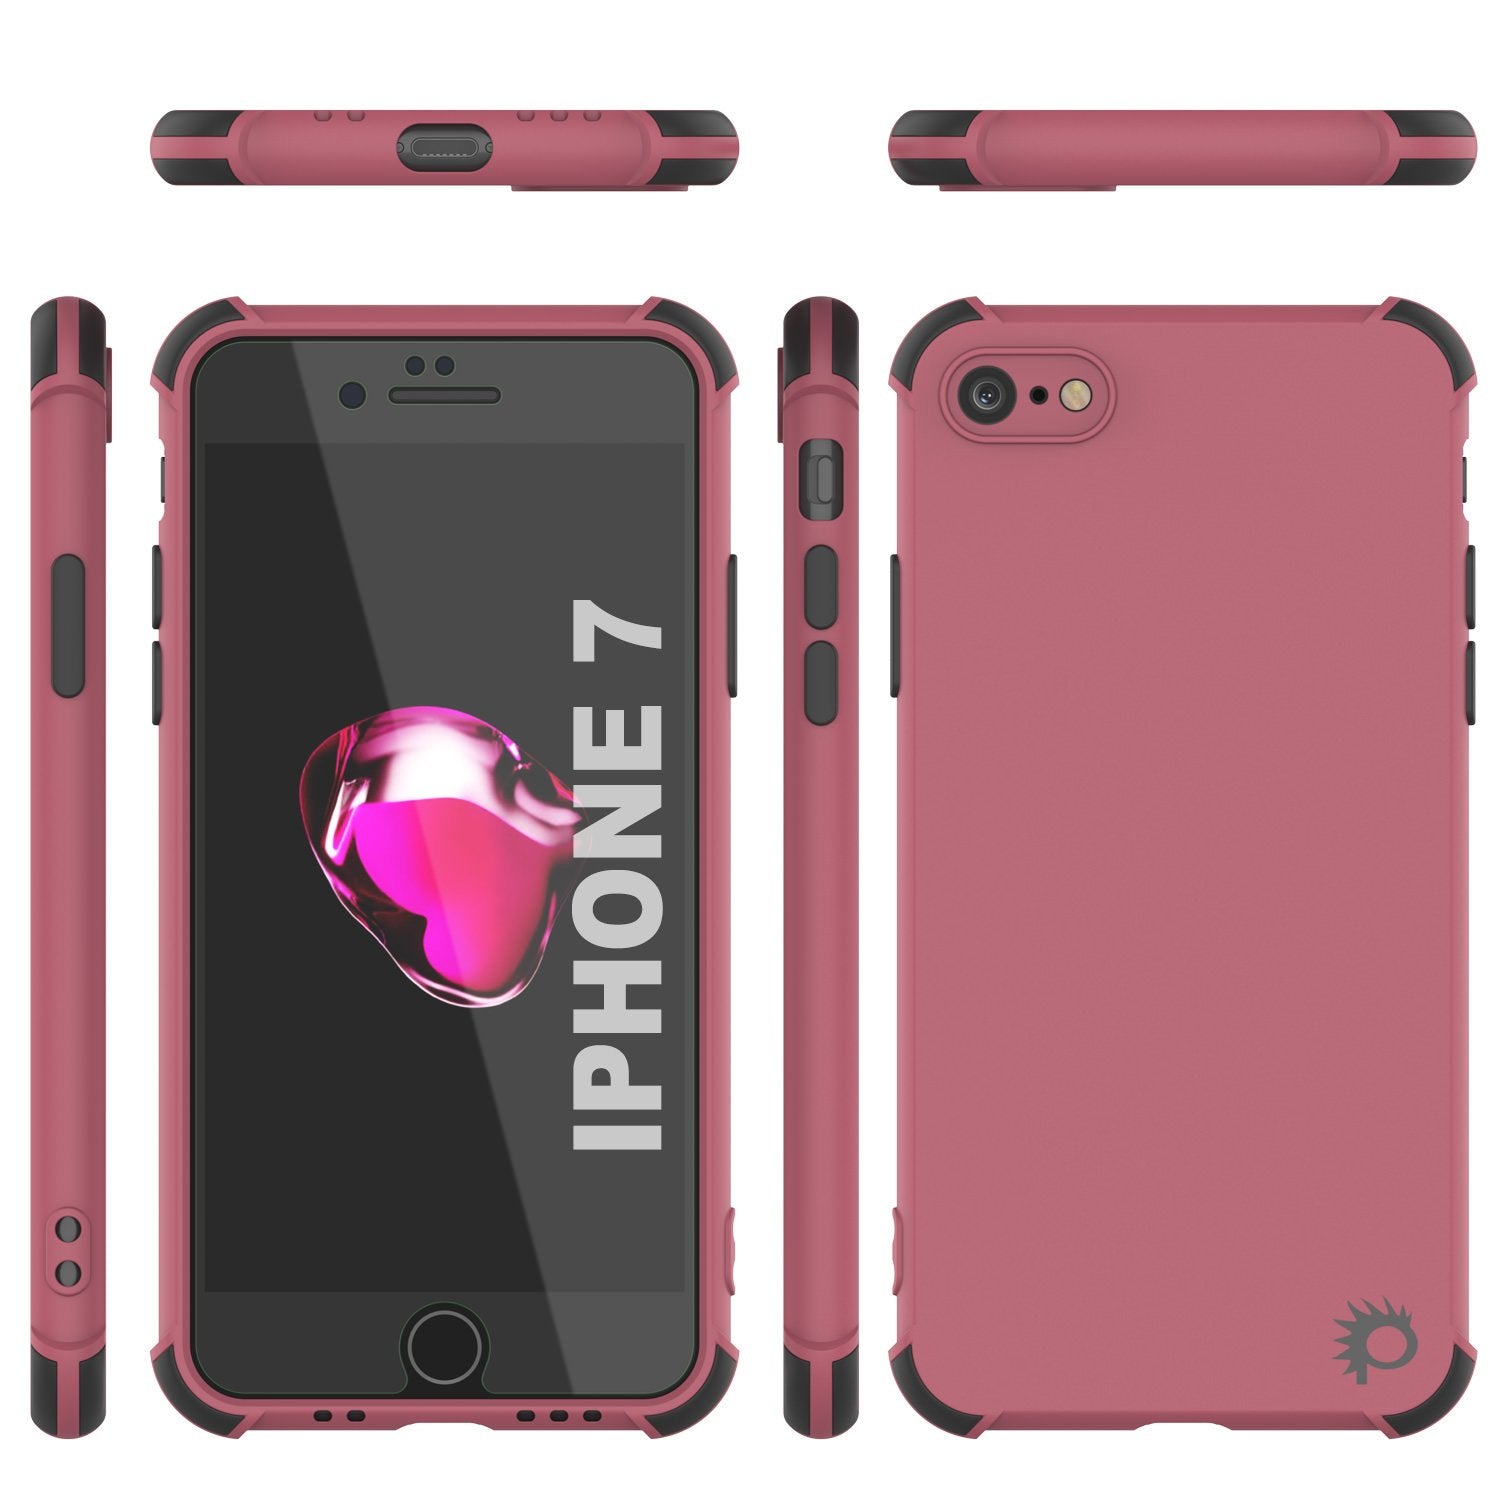 Punkcase Protective & Lightweight TPU Case [Sunshine Series] for iPhone 7 [Rose]